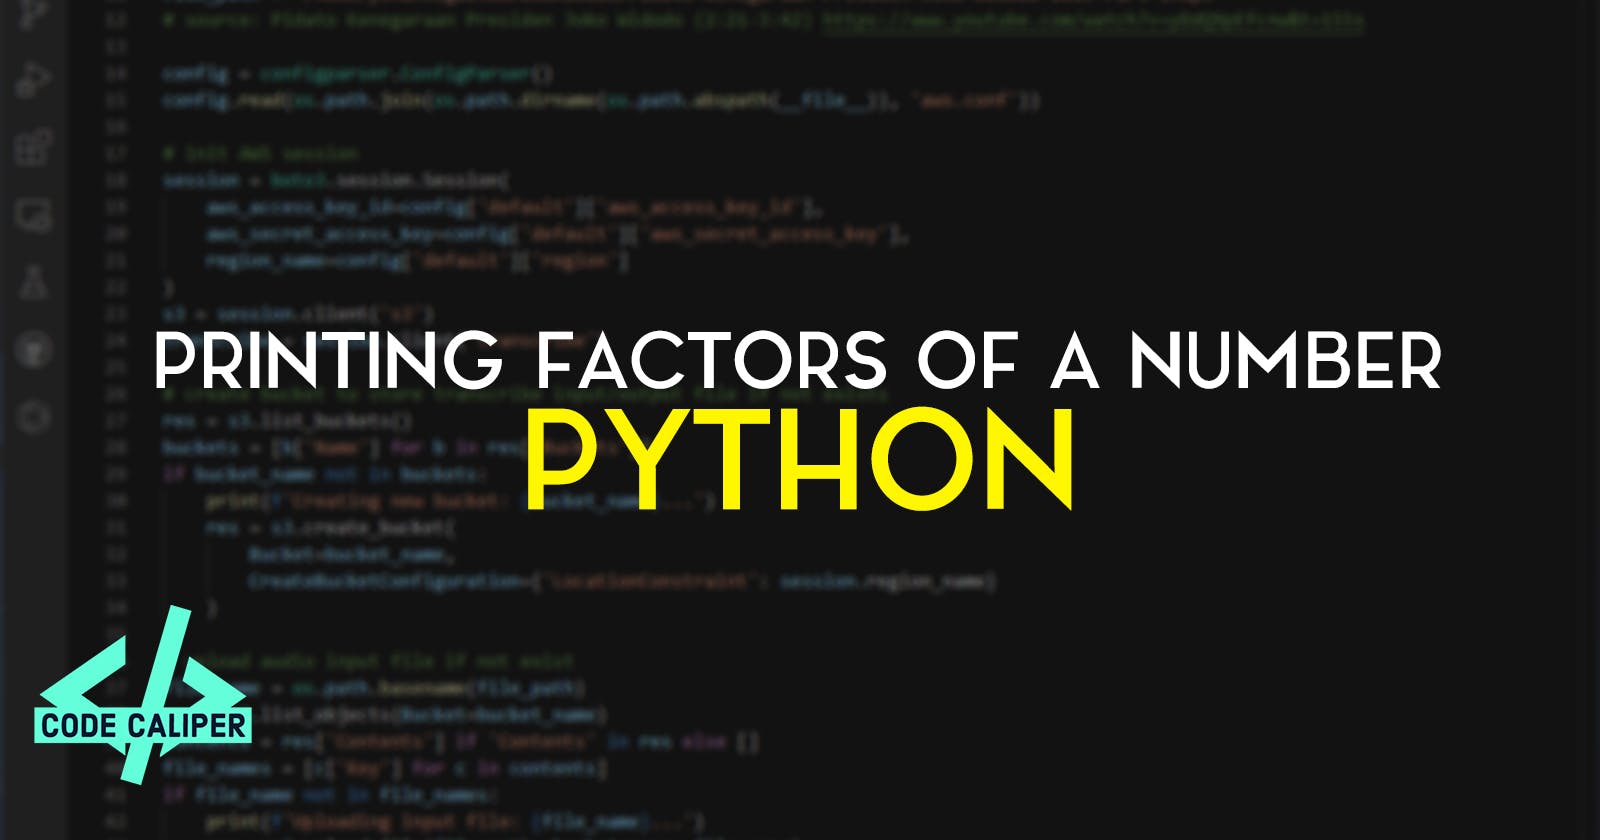 Printing Factors of a Number in Python